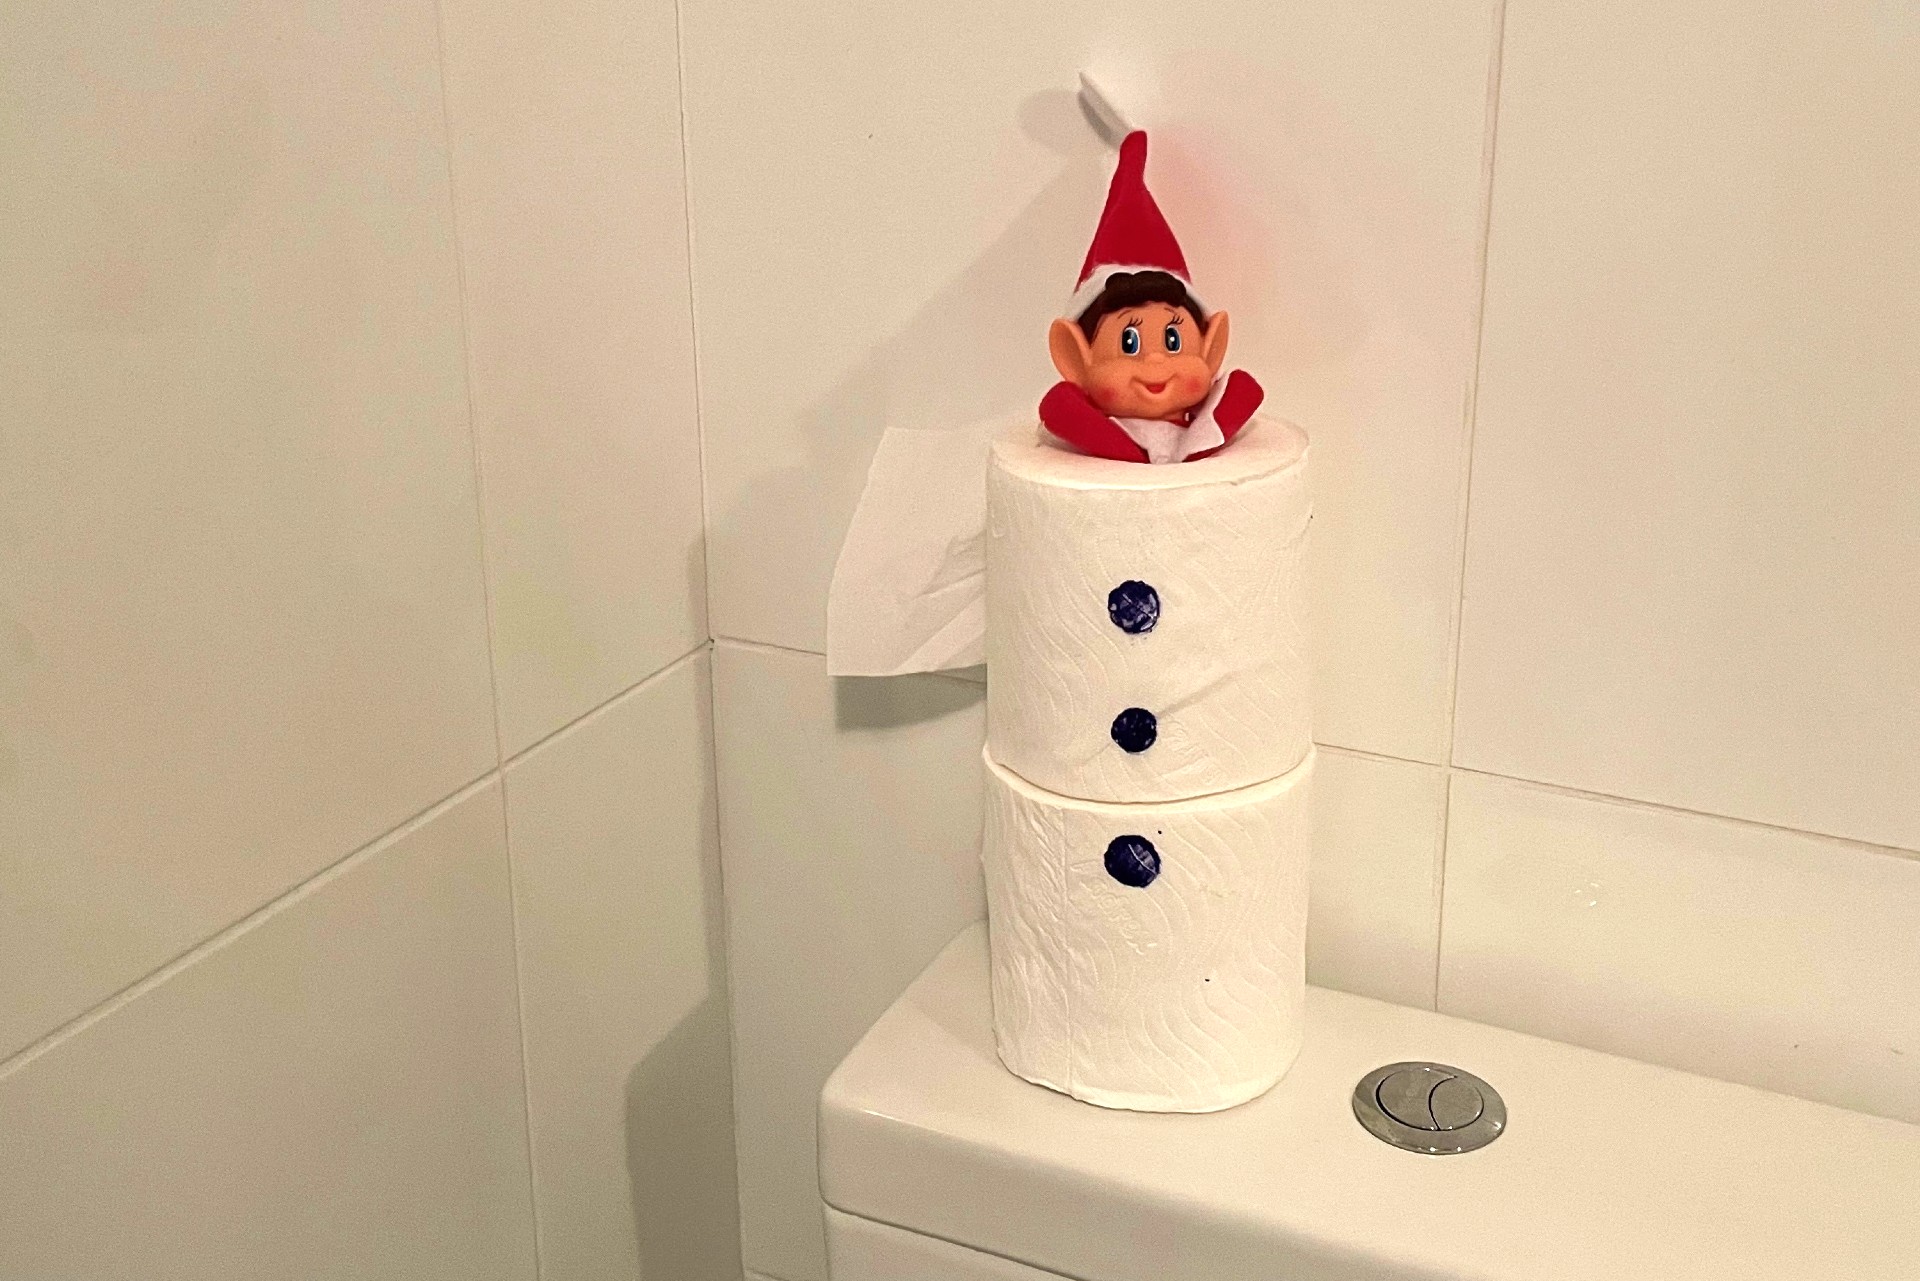 And elf squashed into 2 toilet rolls stacked on top of each other with three buttons drawn onto the body of the would-be snowman